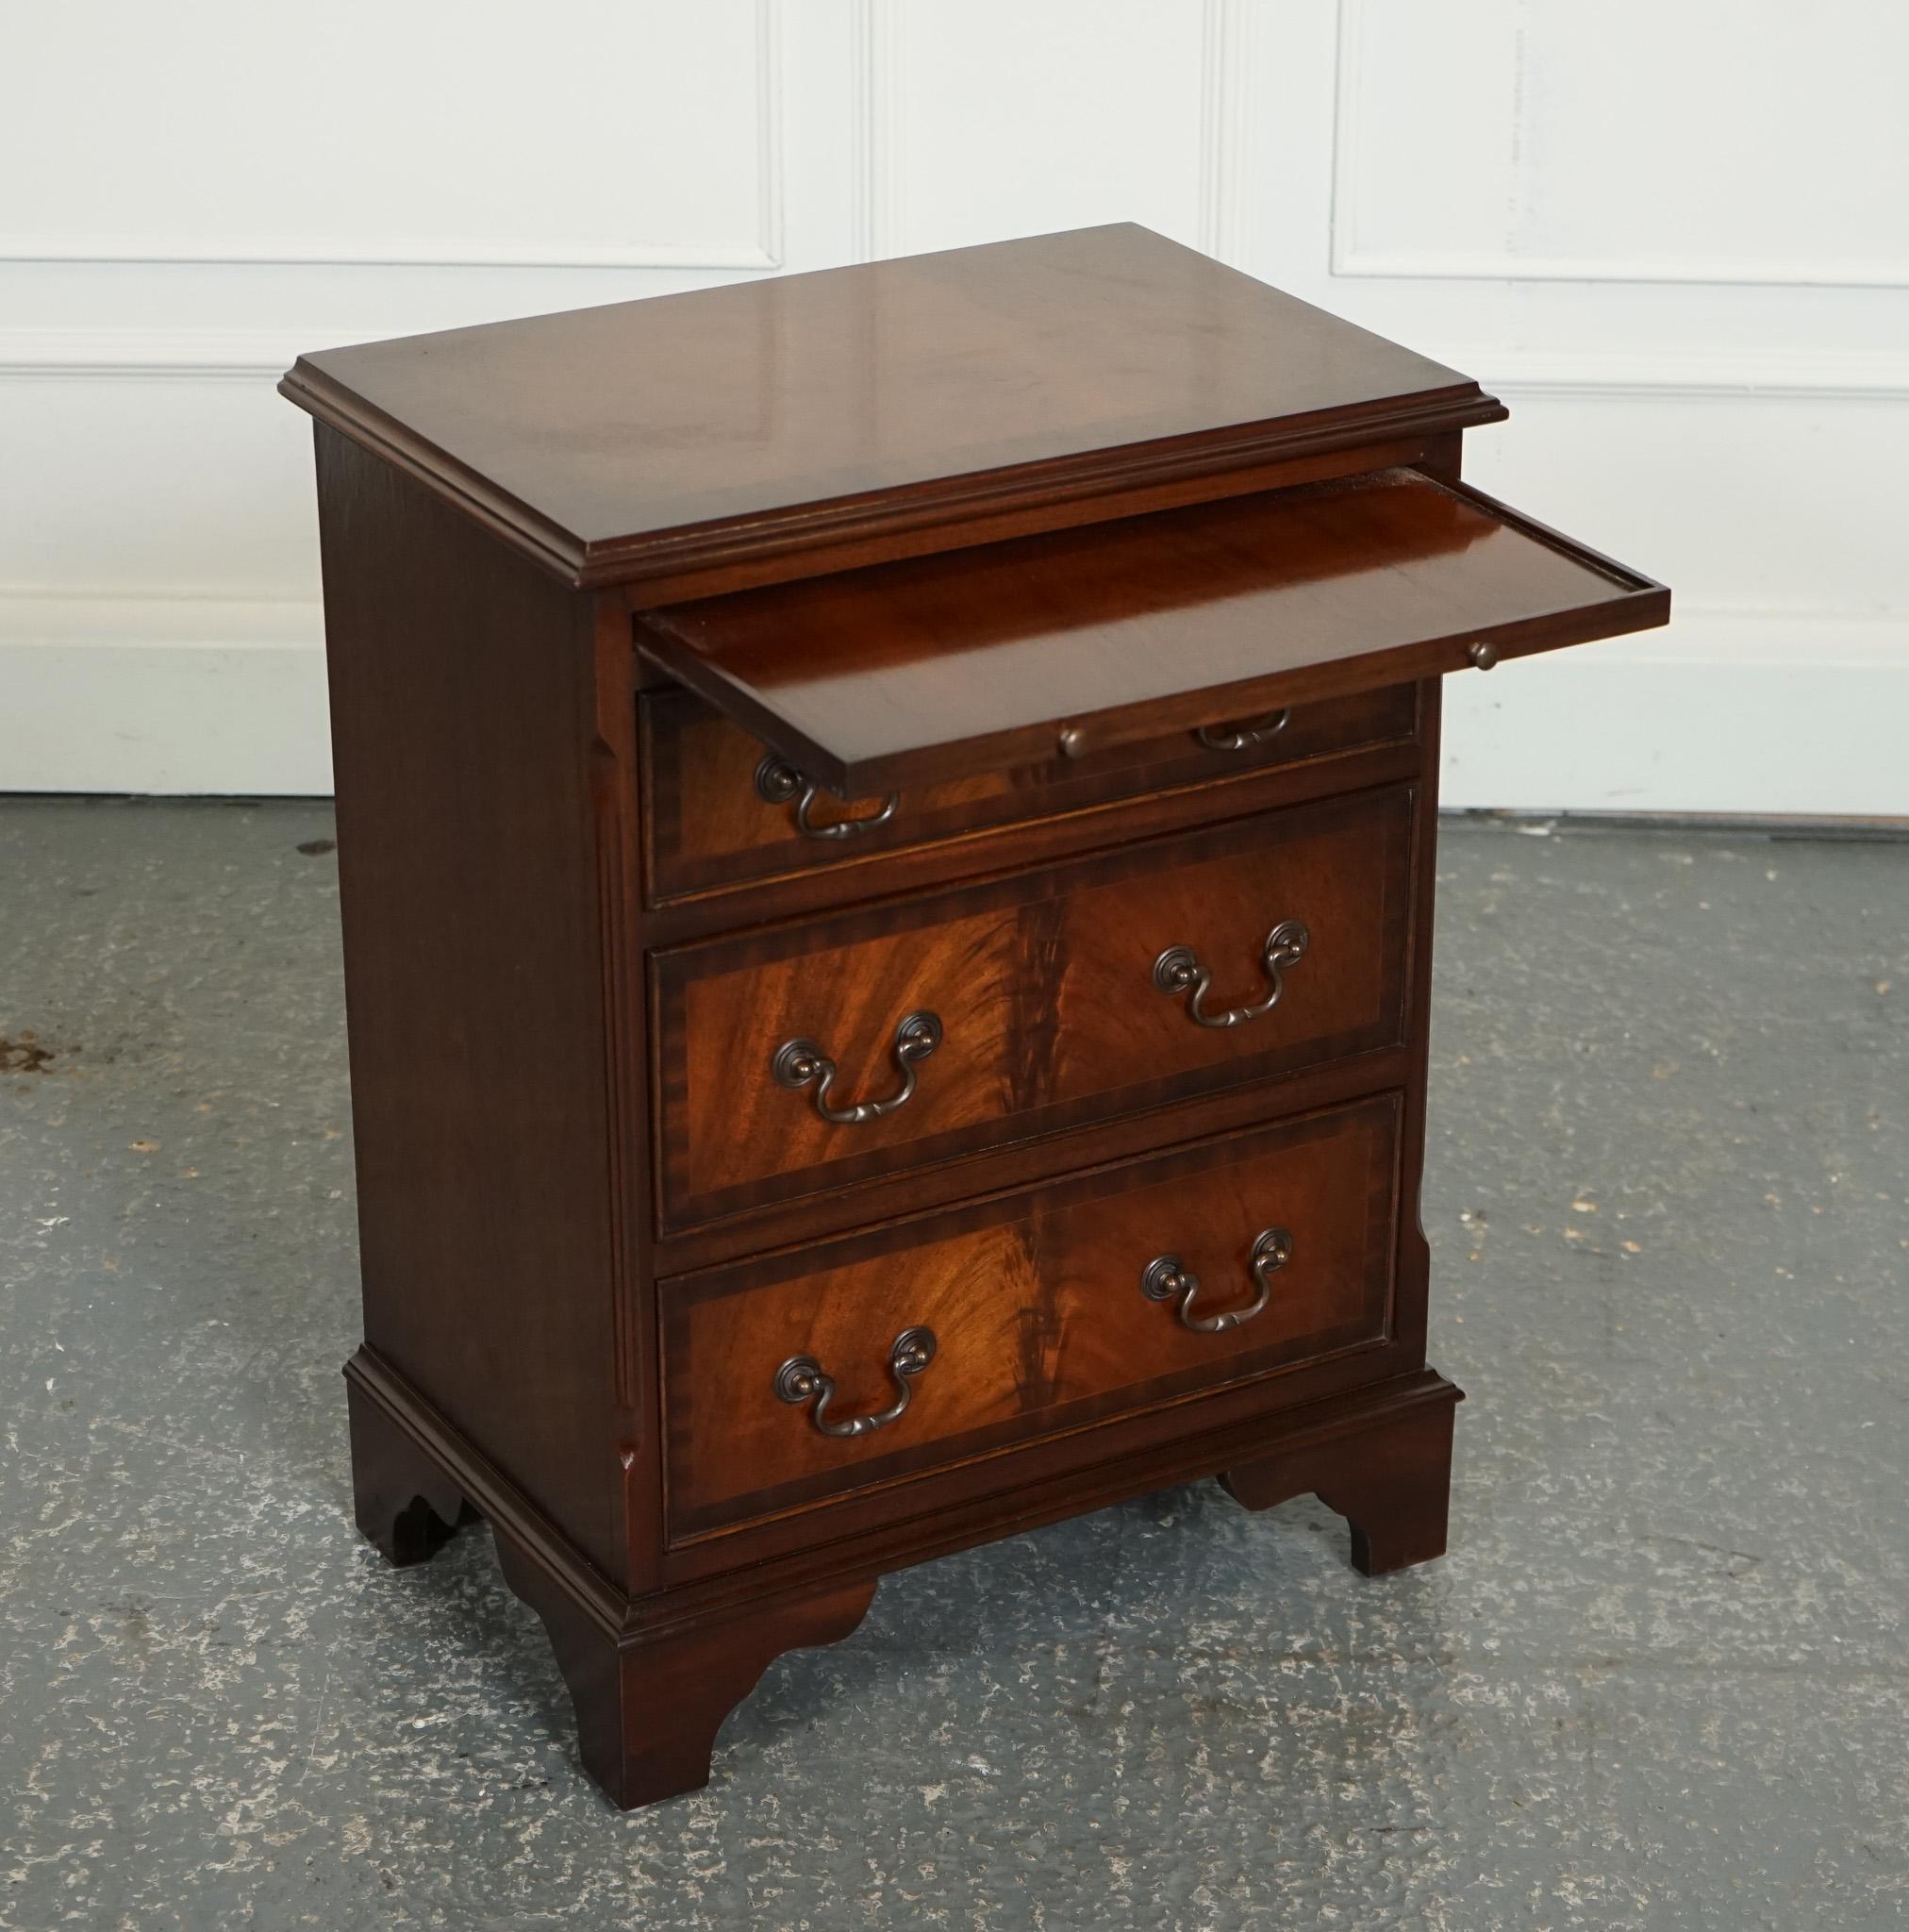 Georgian LOVELY GEORGIAN STYLE SMALL CHEST OF DRAWERS SiDE TABLE WITH BUTLER TRAY J1 For Sale